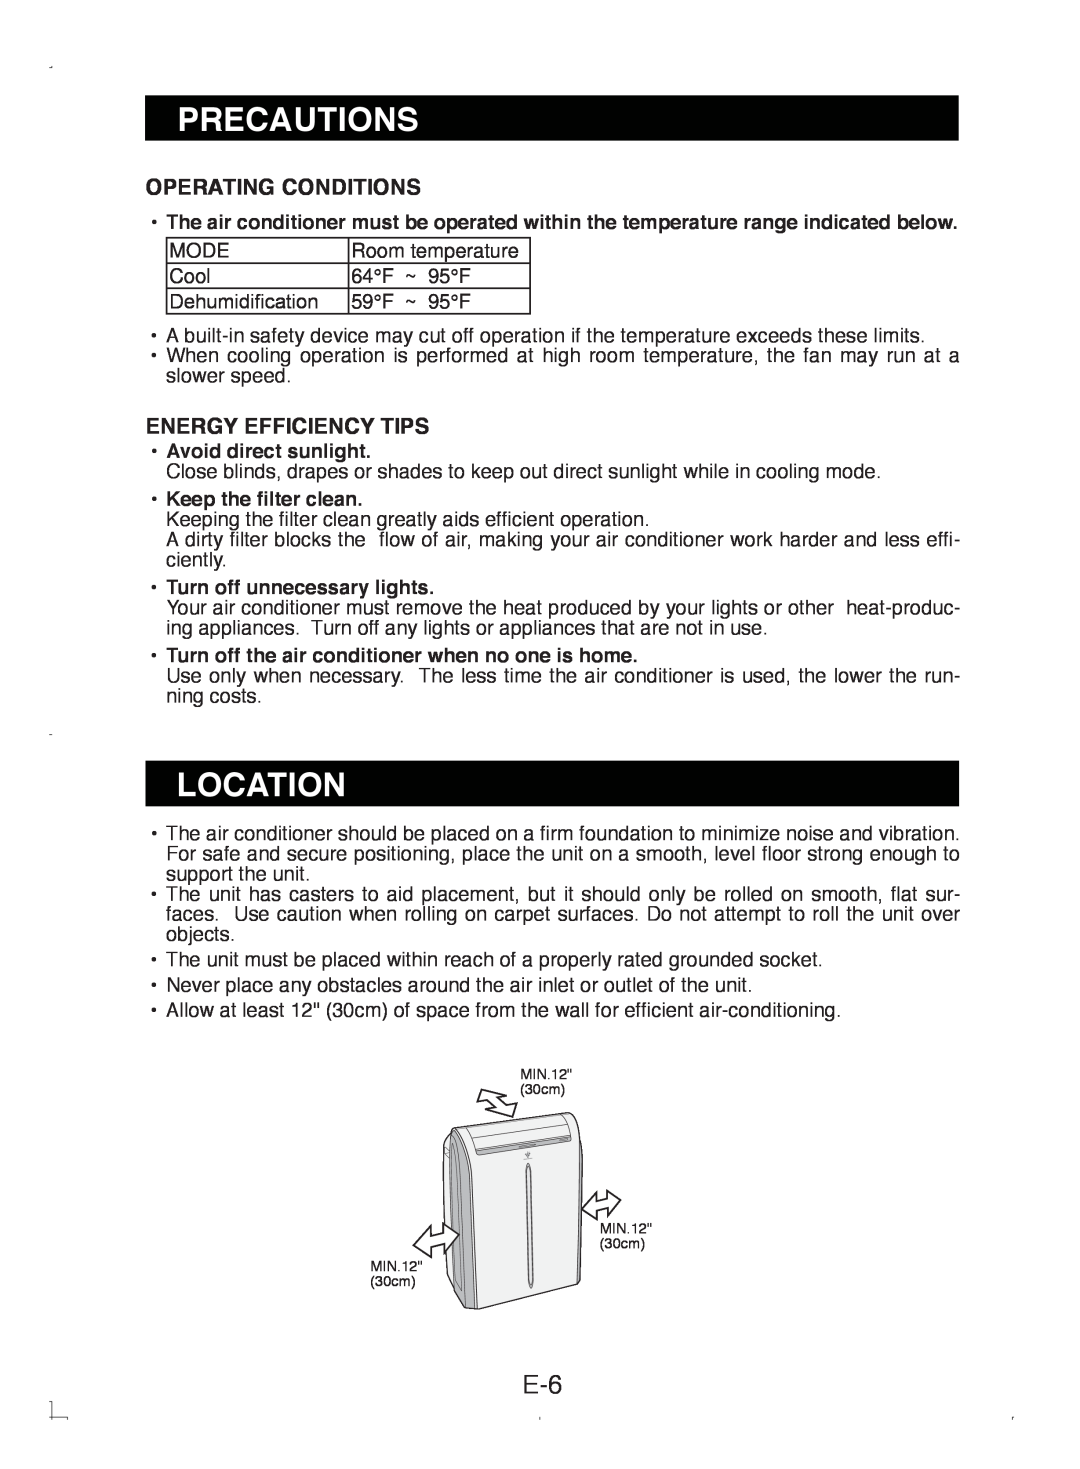 Sony CV-P12PX operation manual Location, Operating Conditions, Energy Efficiency Tips, Precautions 